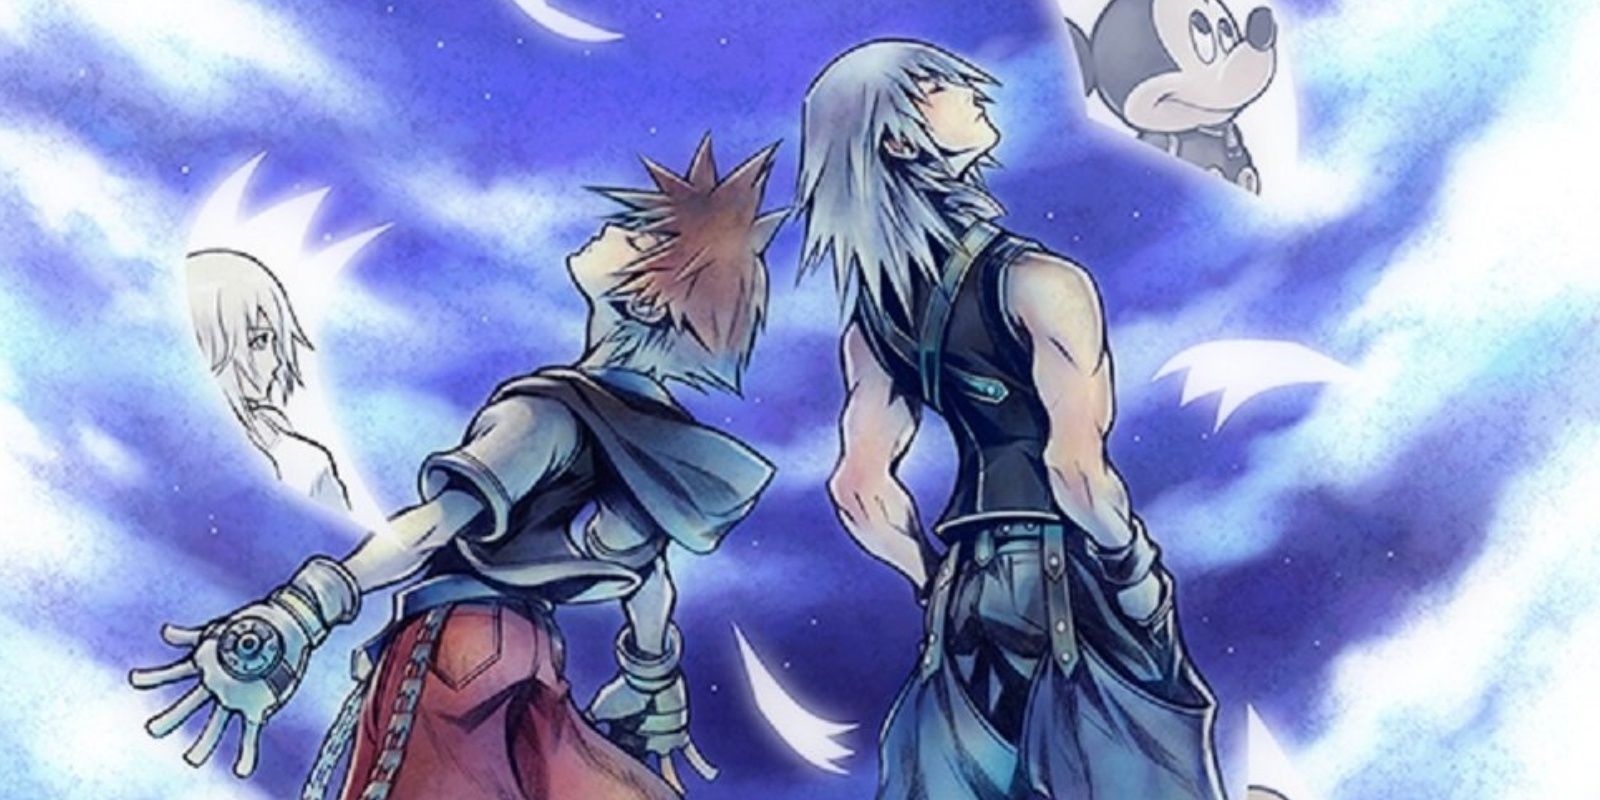 Cover art for Kingdom hearts Re Chain of Memories